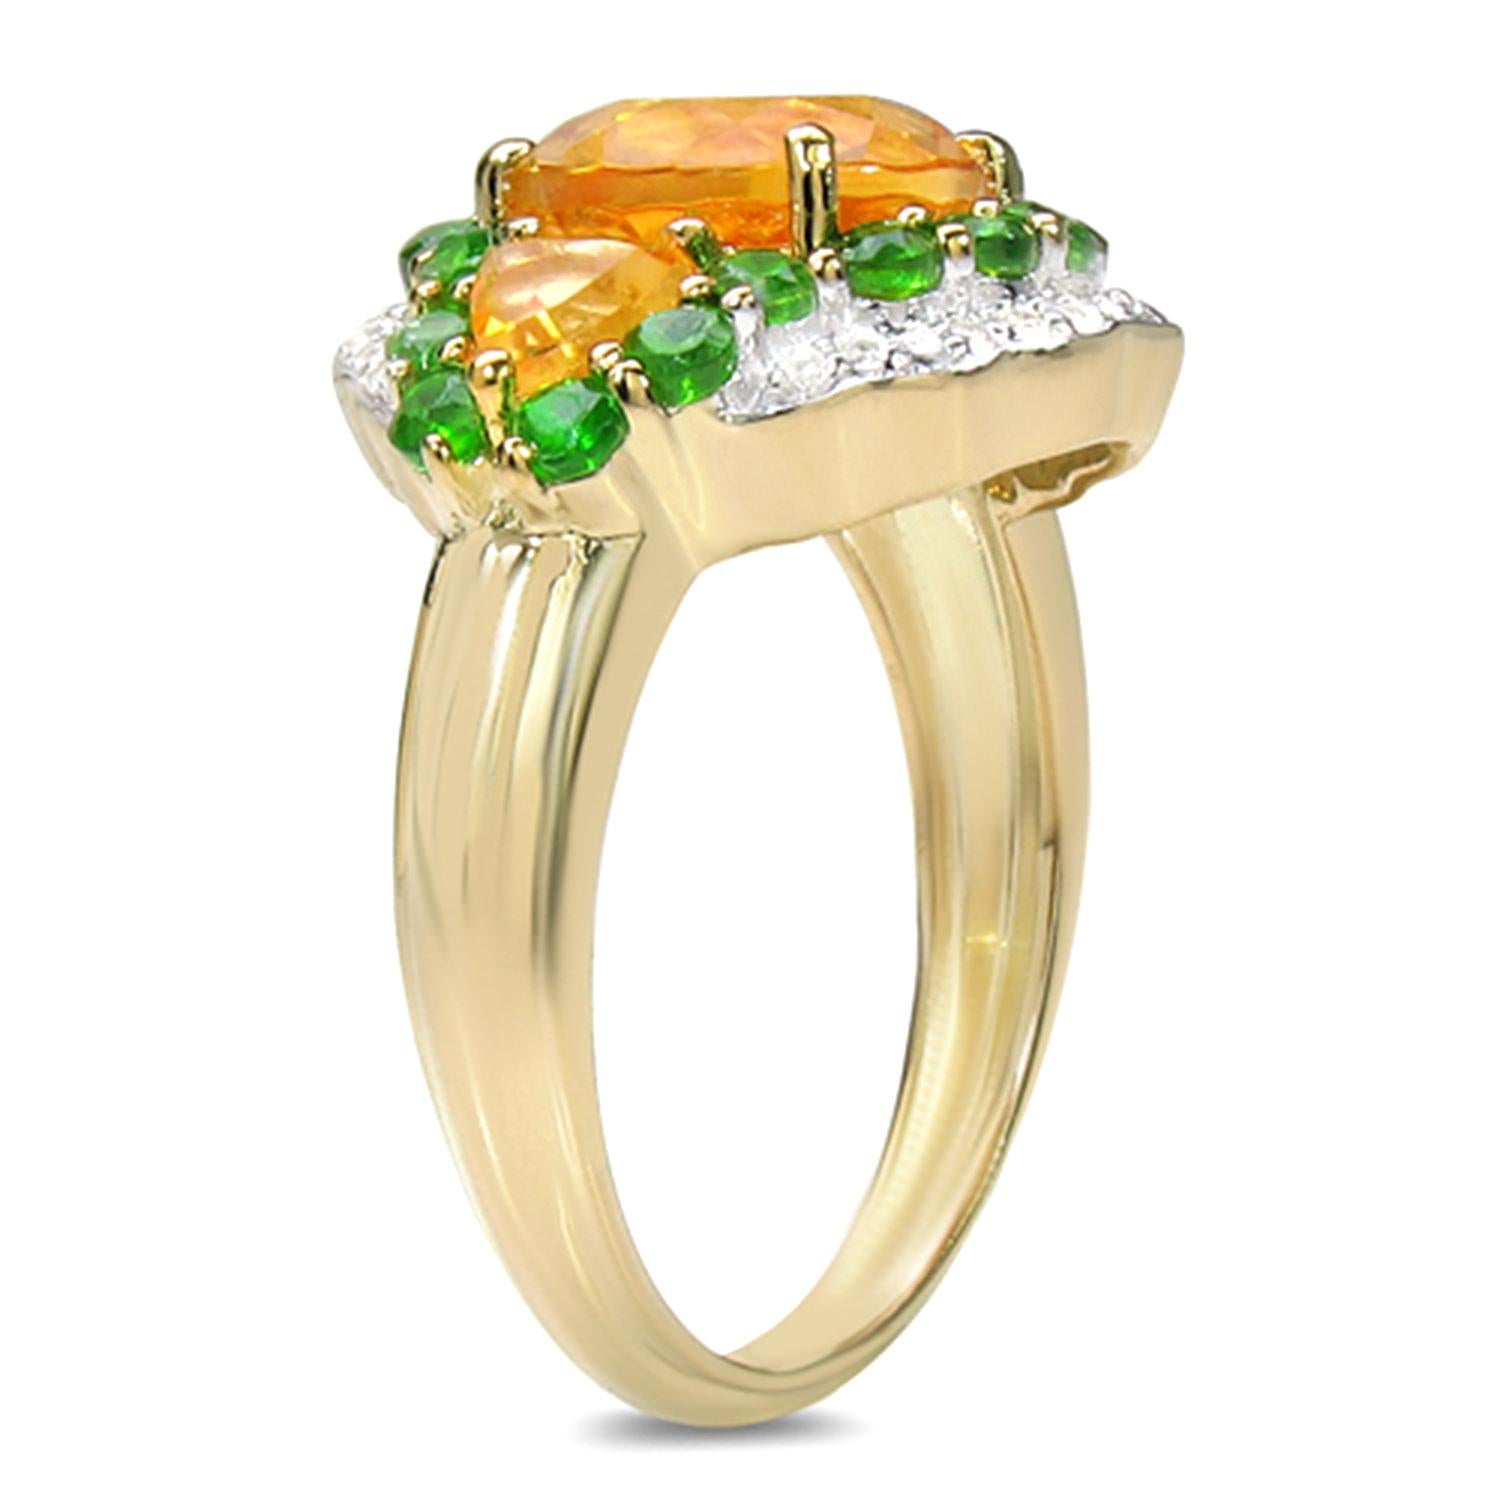 Citrine Cocktail Ring Chrome Diopside Topaz 3.93 Carats 14K Yellow Gold Plated In Excellent Condition For Sale In Laguna Niguel, CA